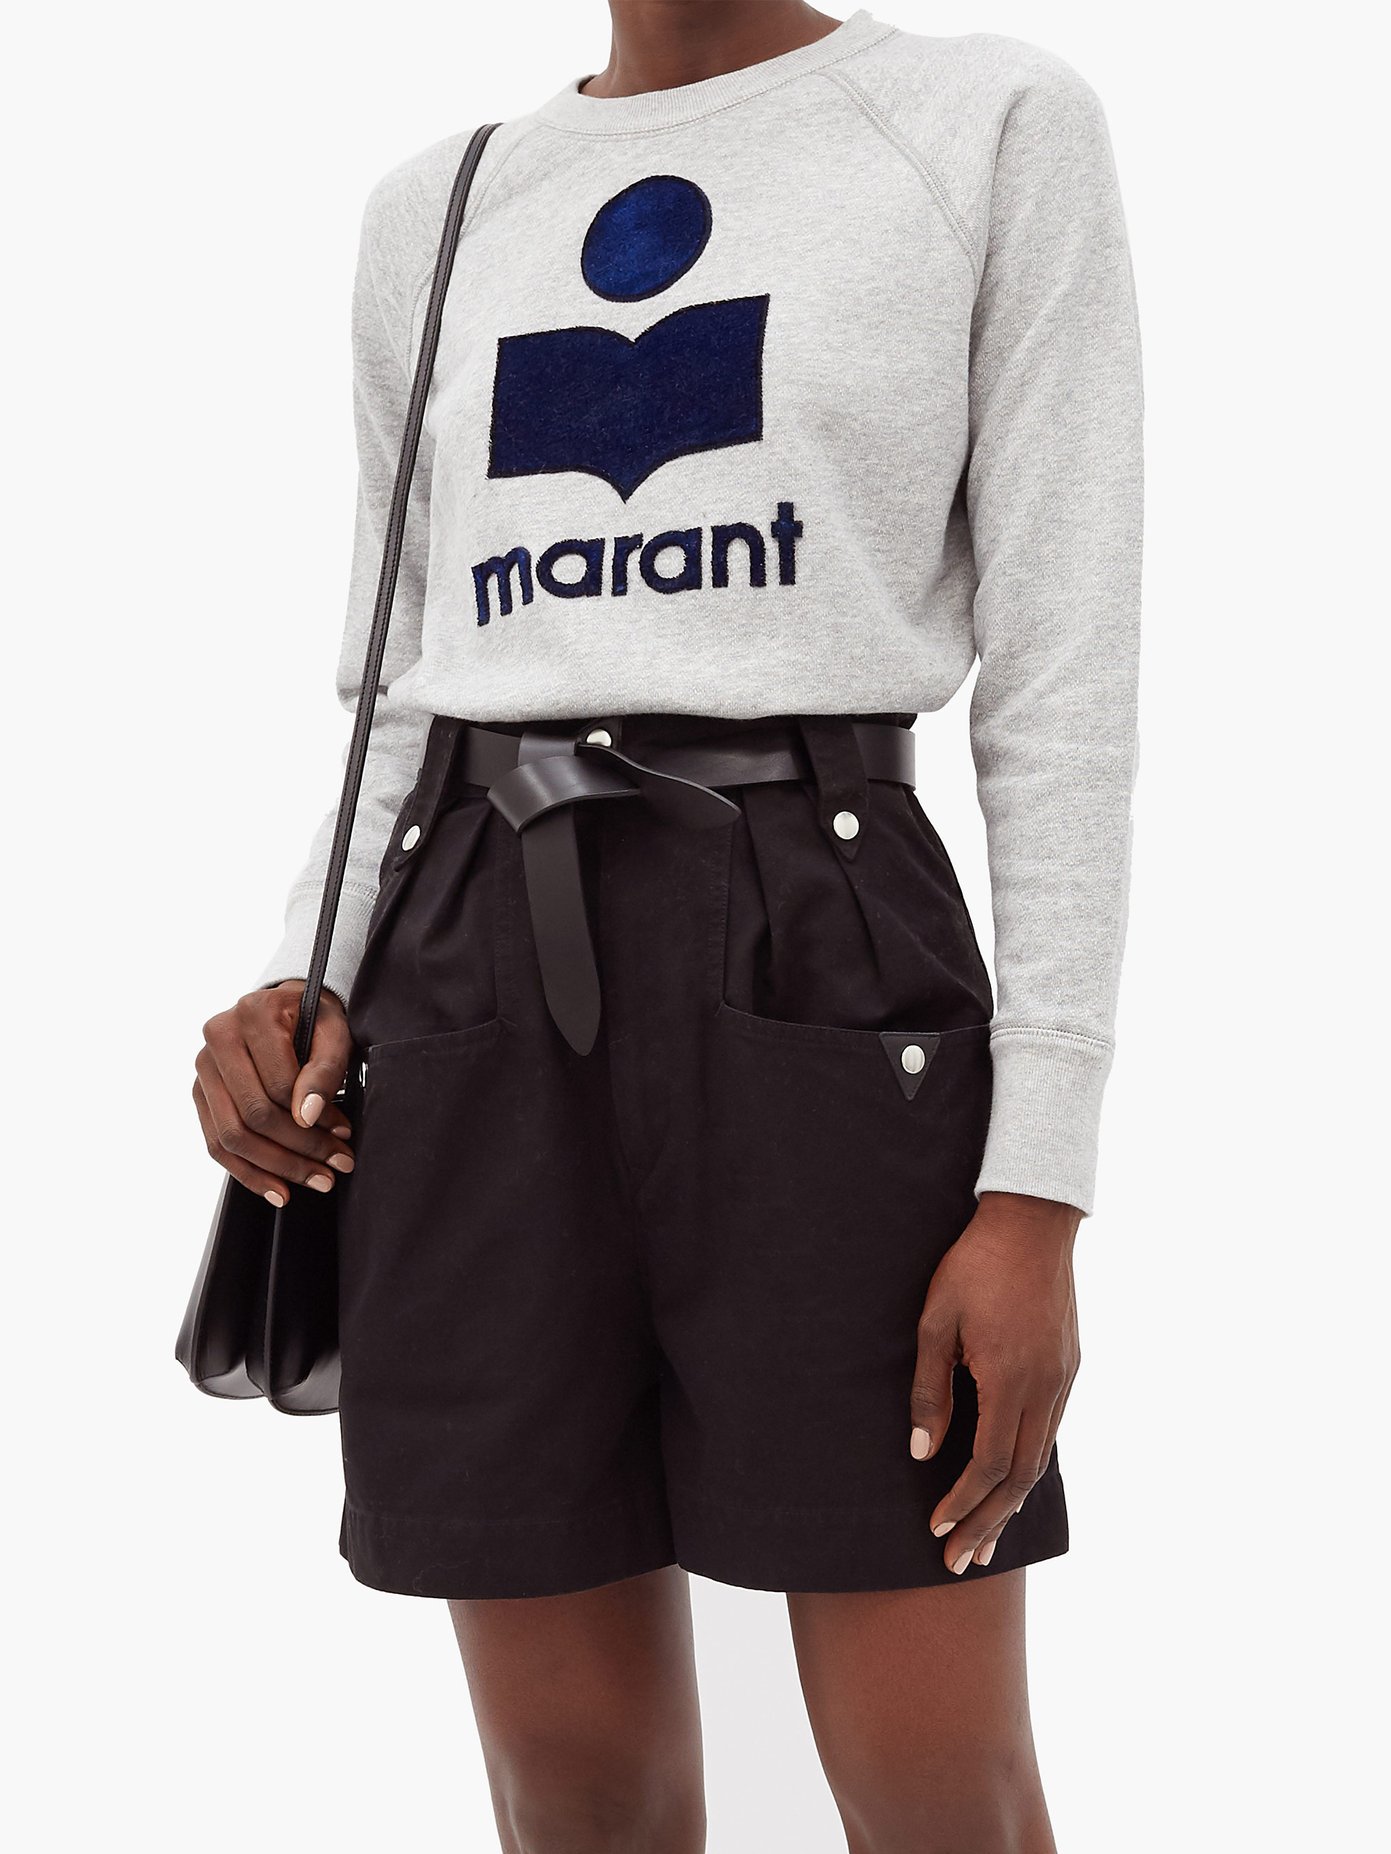 https://assetsprx.matchesfashion.com/img/product/outfit_1360077_1_zoom.jpg